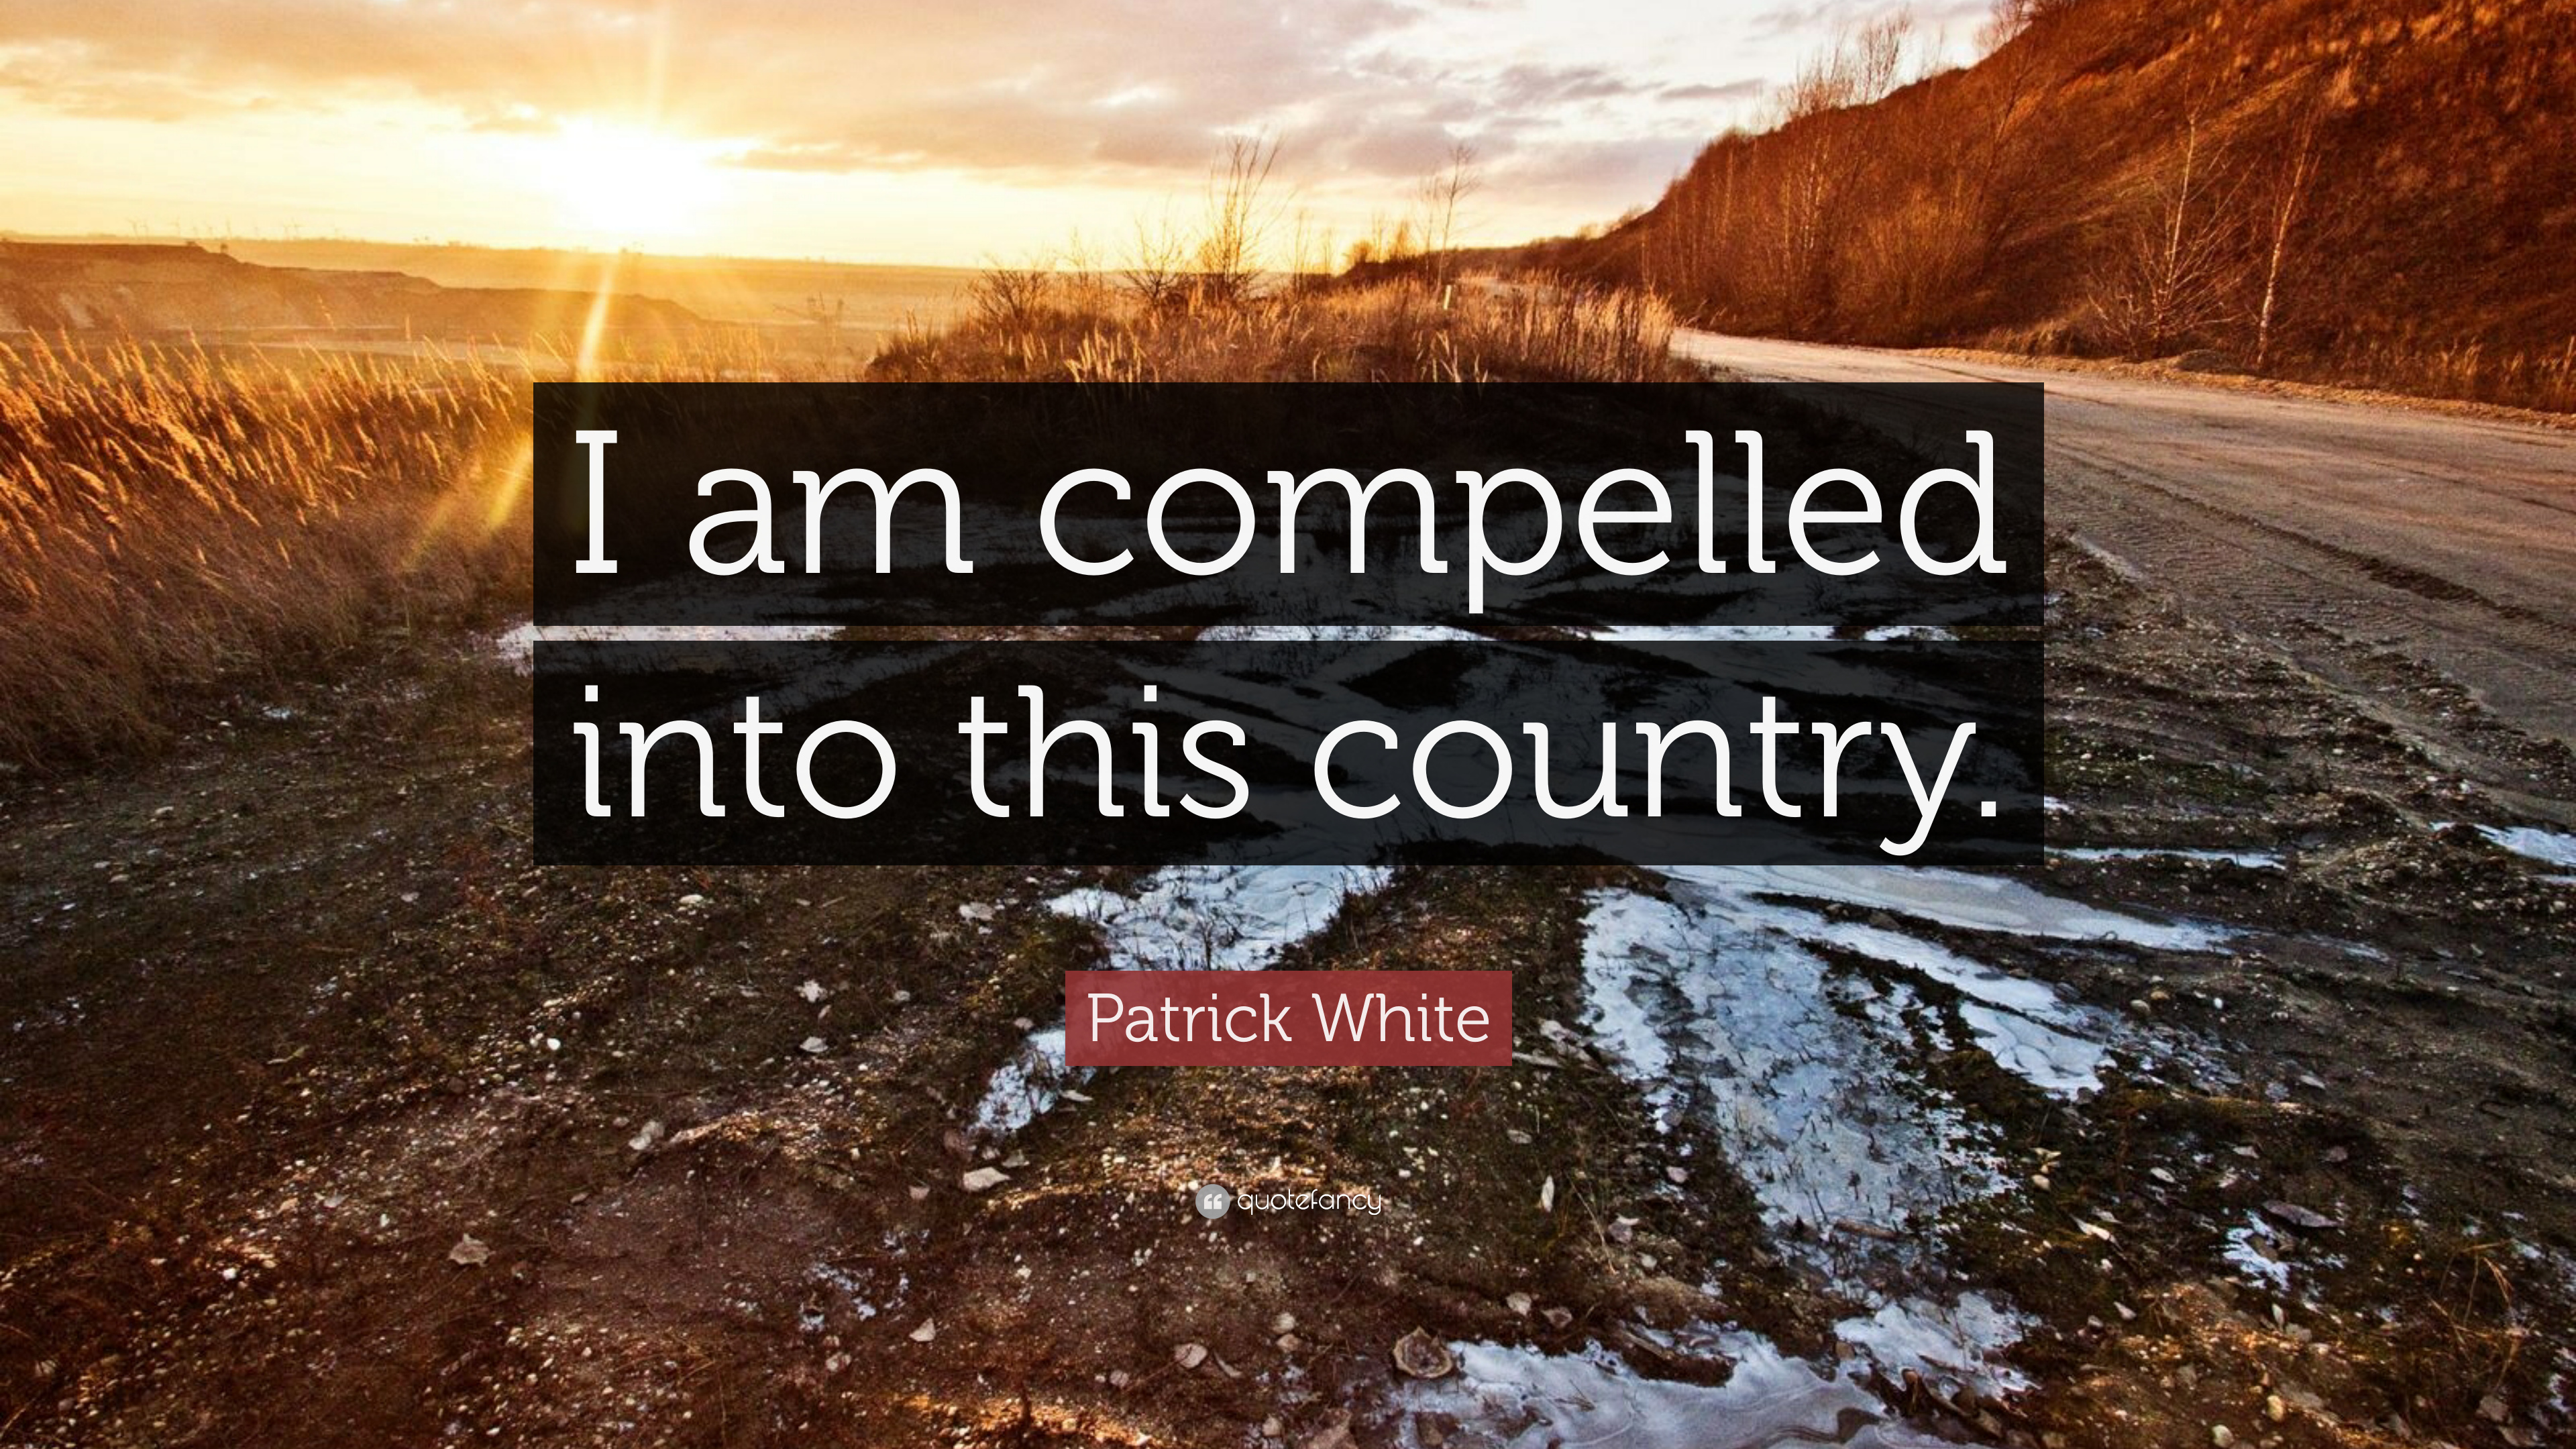 Patrick White Quote: “I am compelled into this country.”